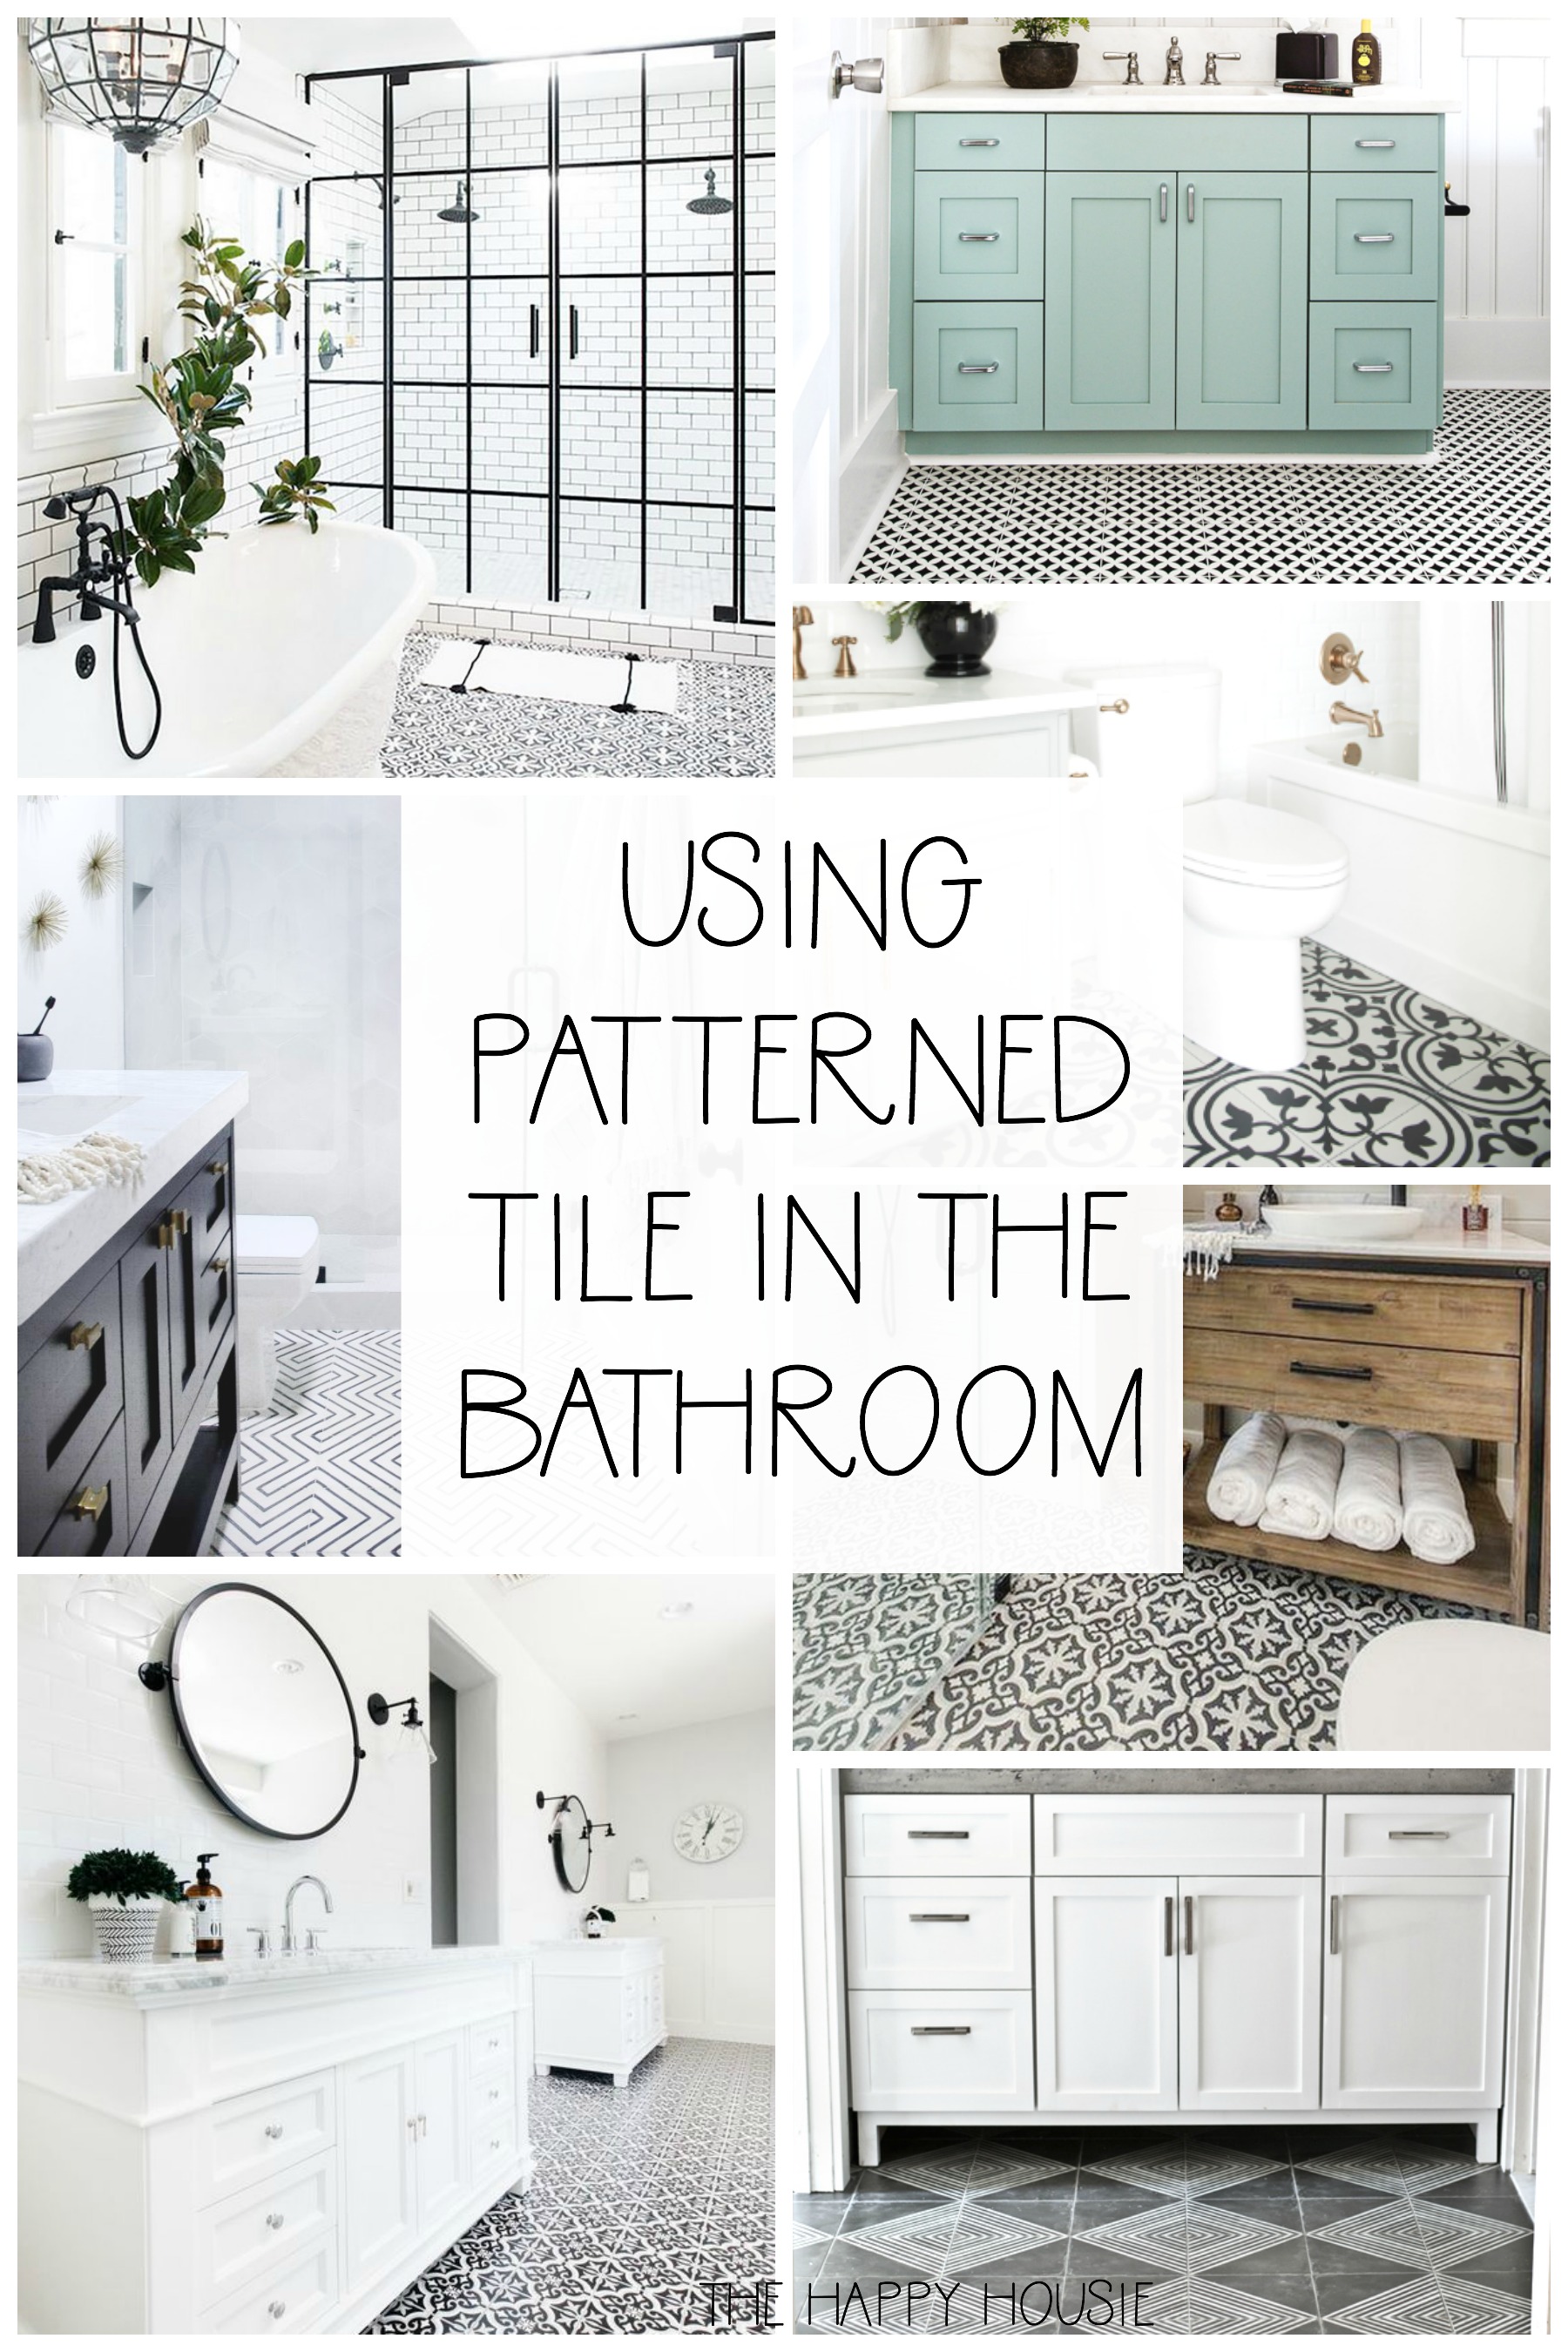 Using Patterned Tile In The Bathroom graphic.